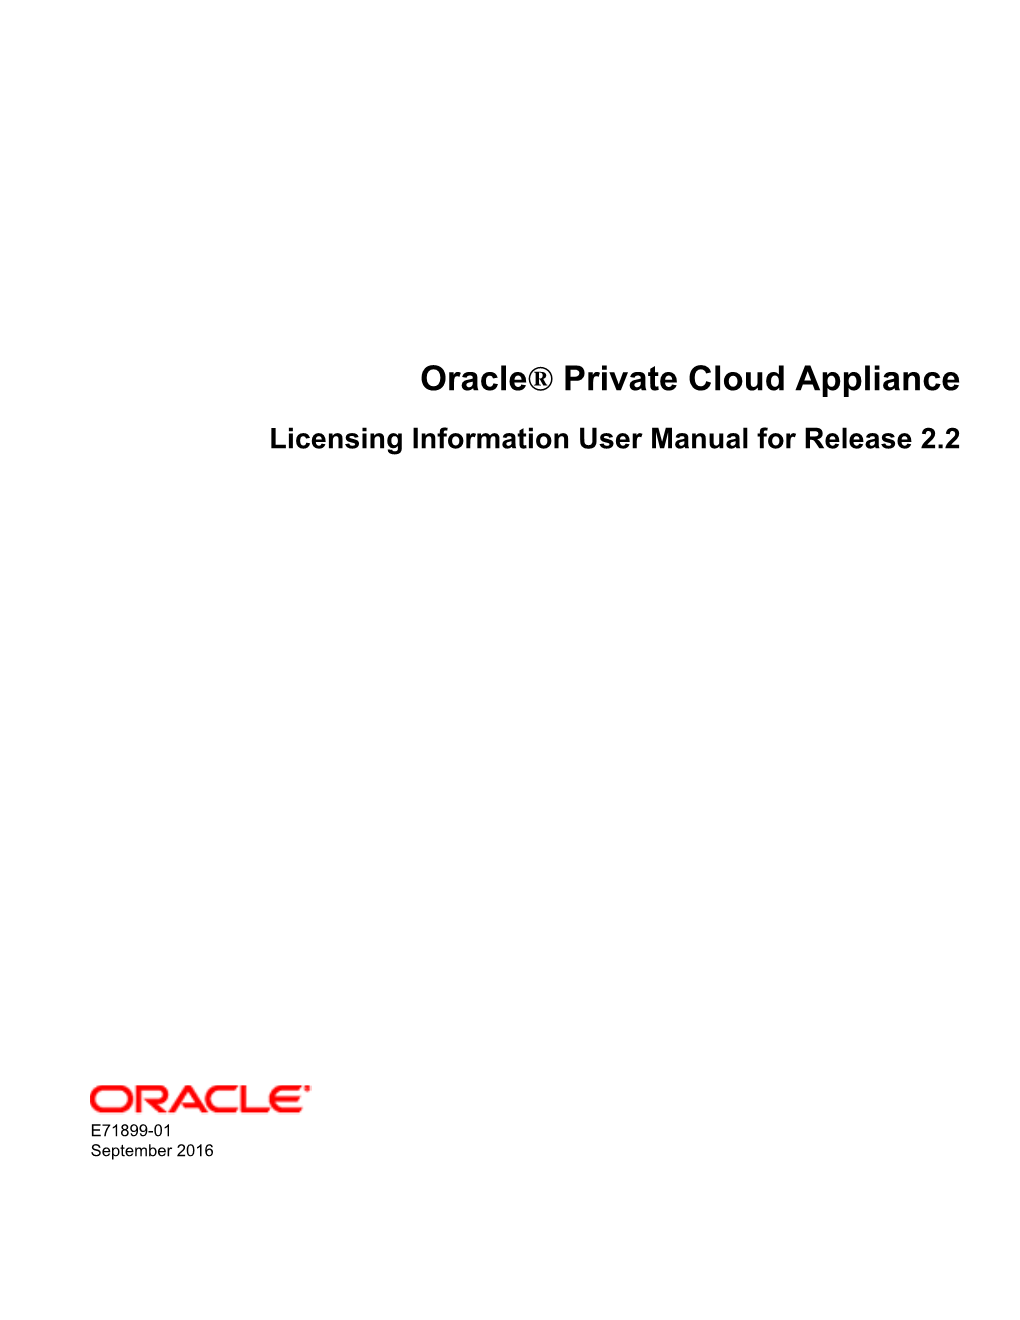 Oracle® Private Cloud Appliance Licensing Information User Manual for Release 2.2